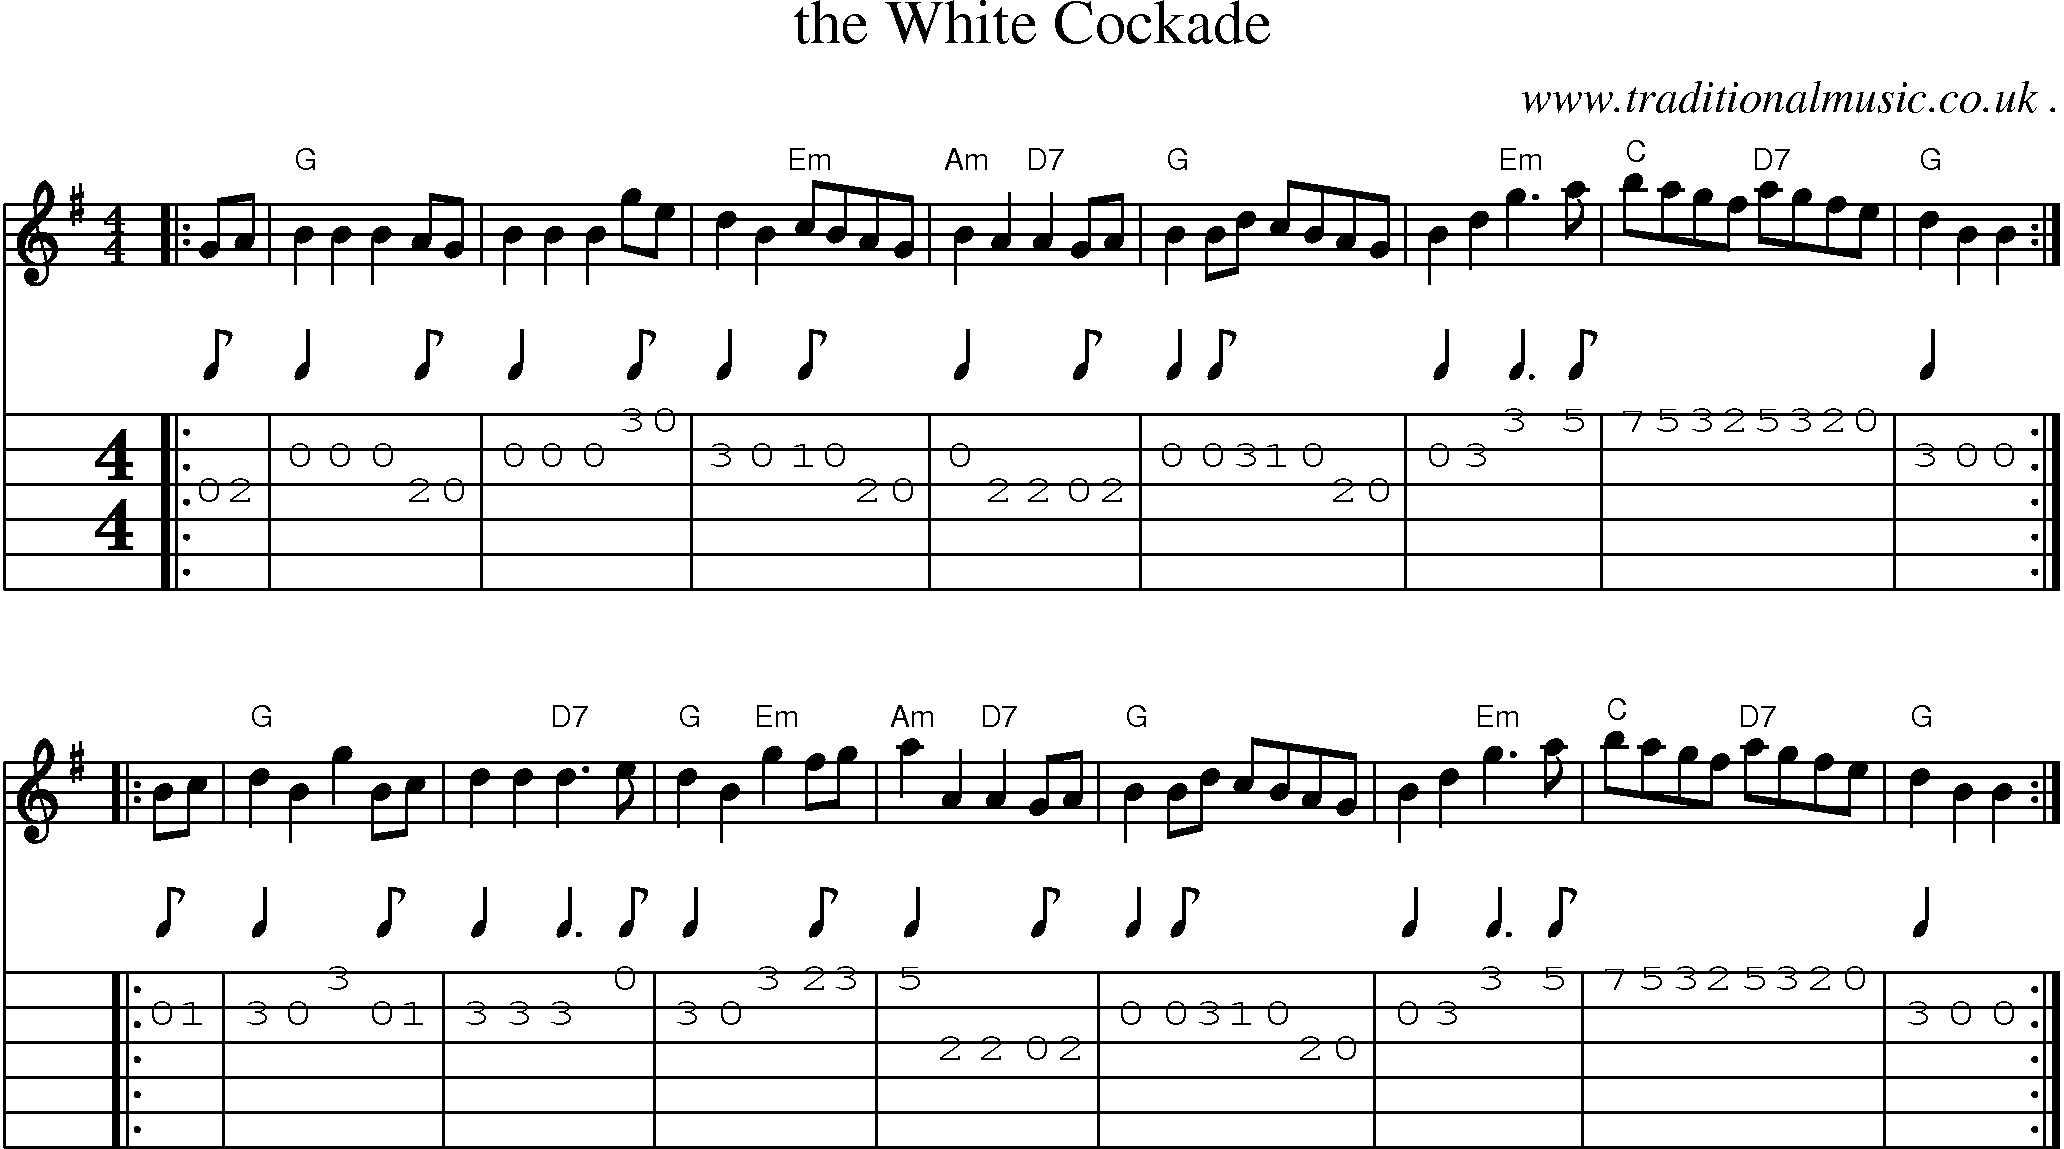 Sheet-music  score, Chords and Guitar Tabs for The White Cockade